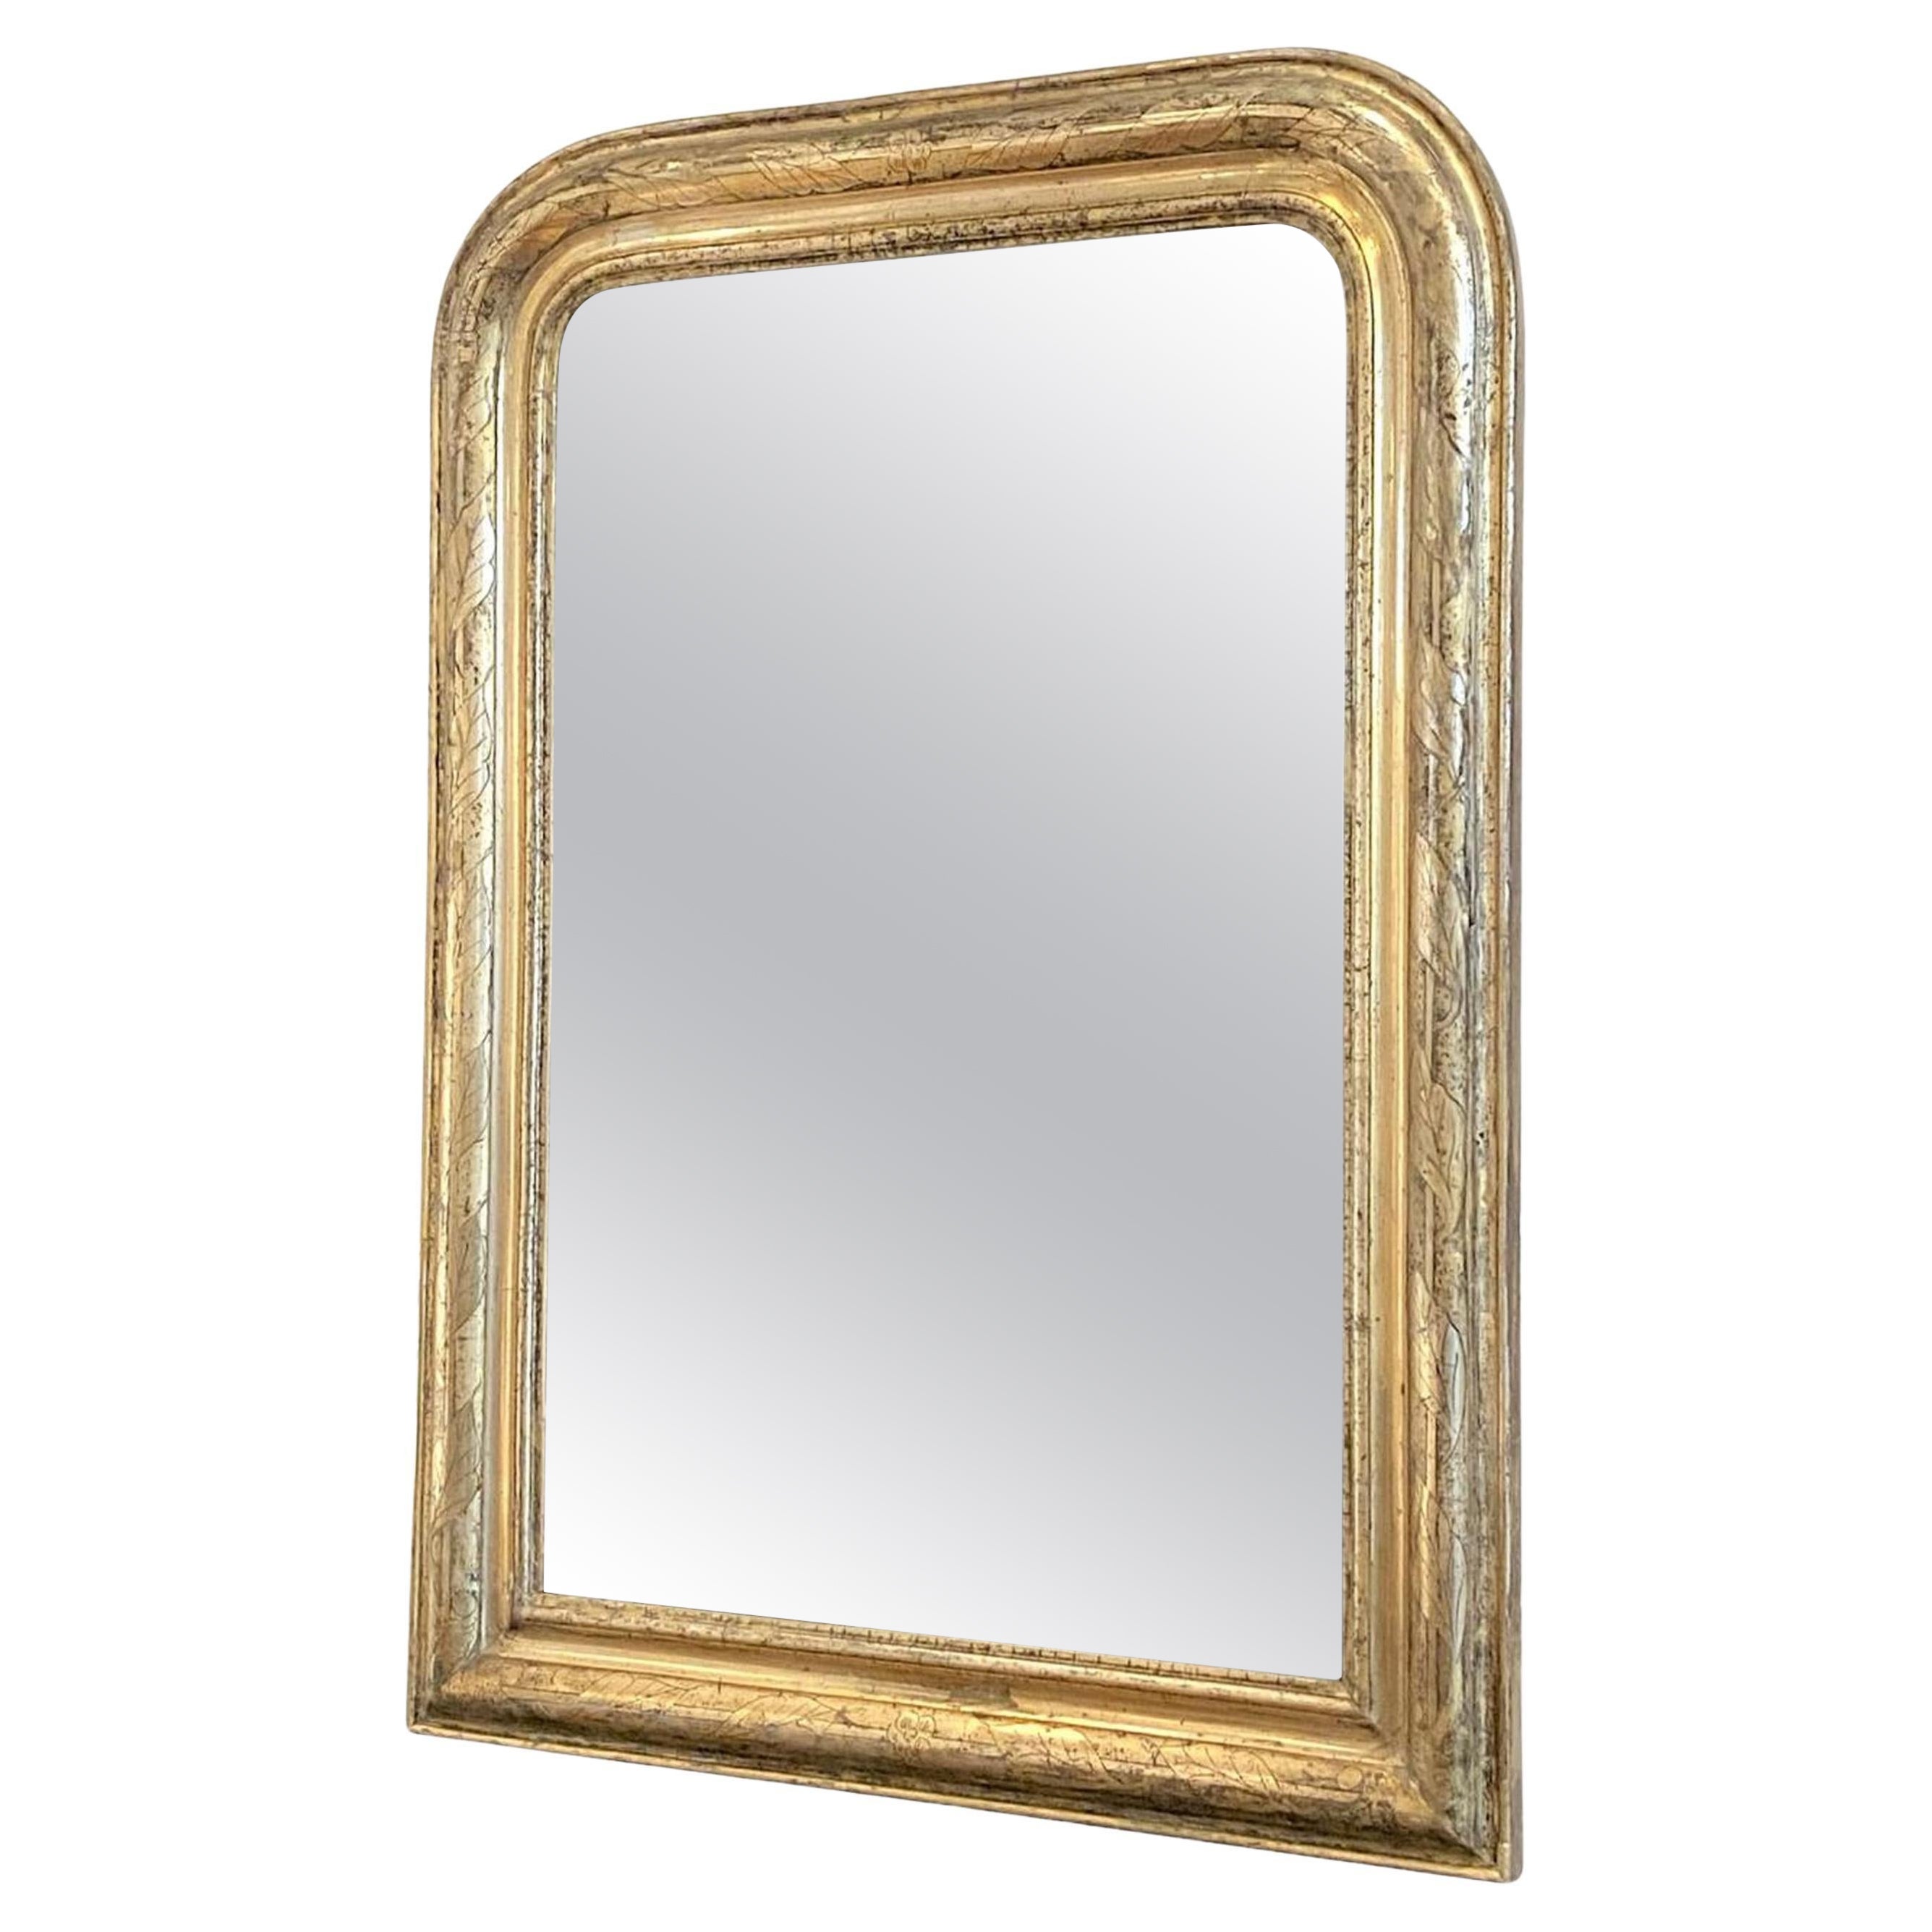 French Mecca Giltwood Mirror - Circa 1850 For Sale